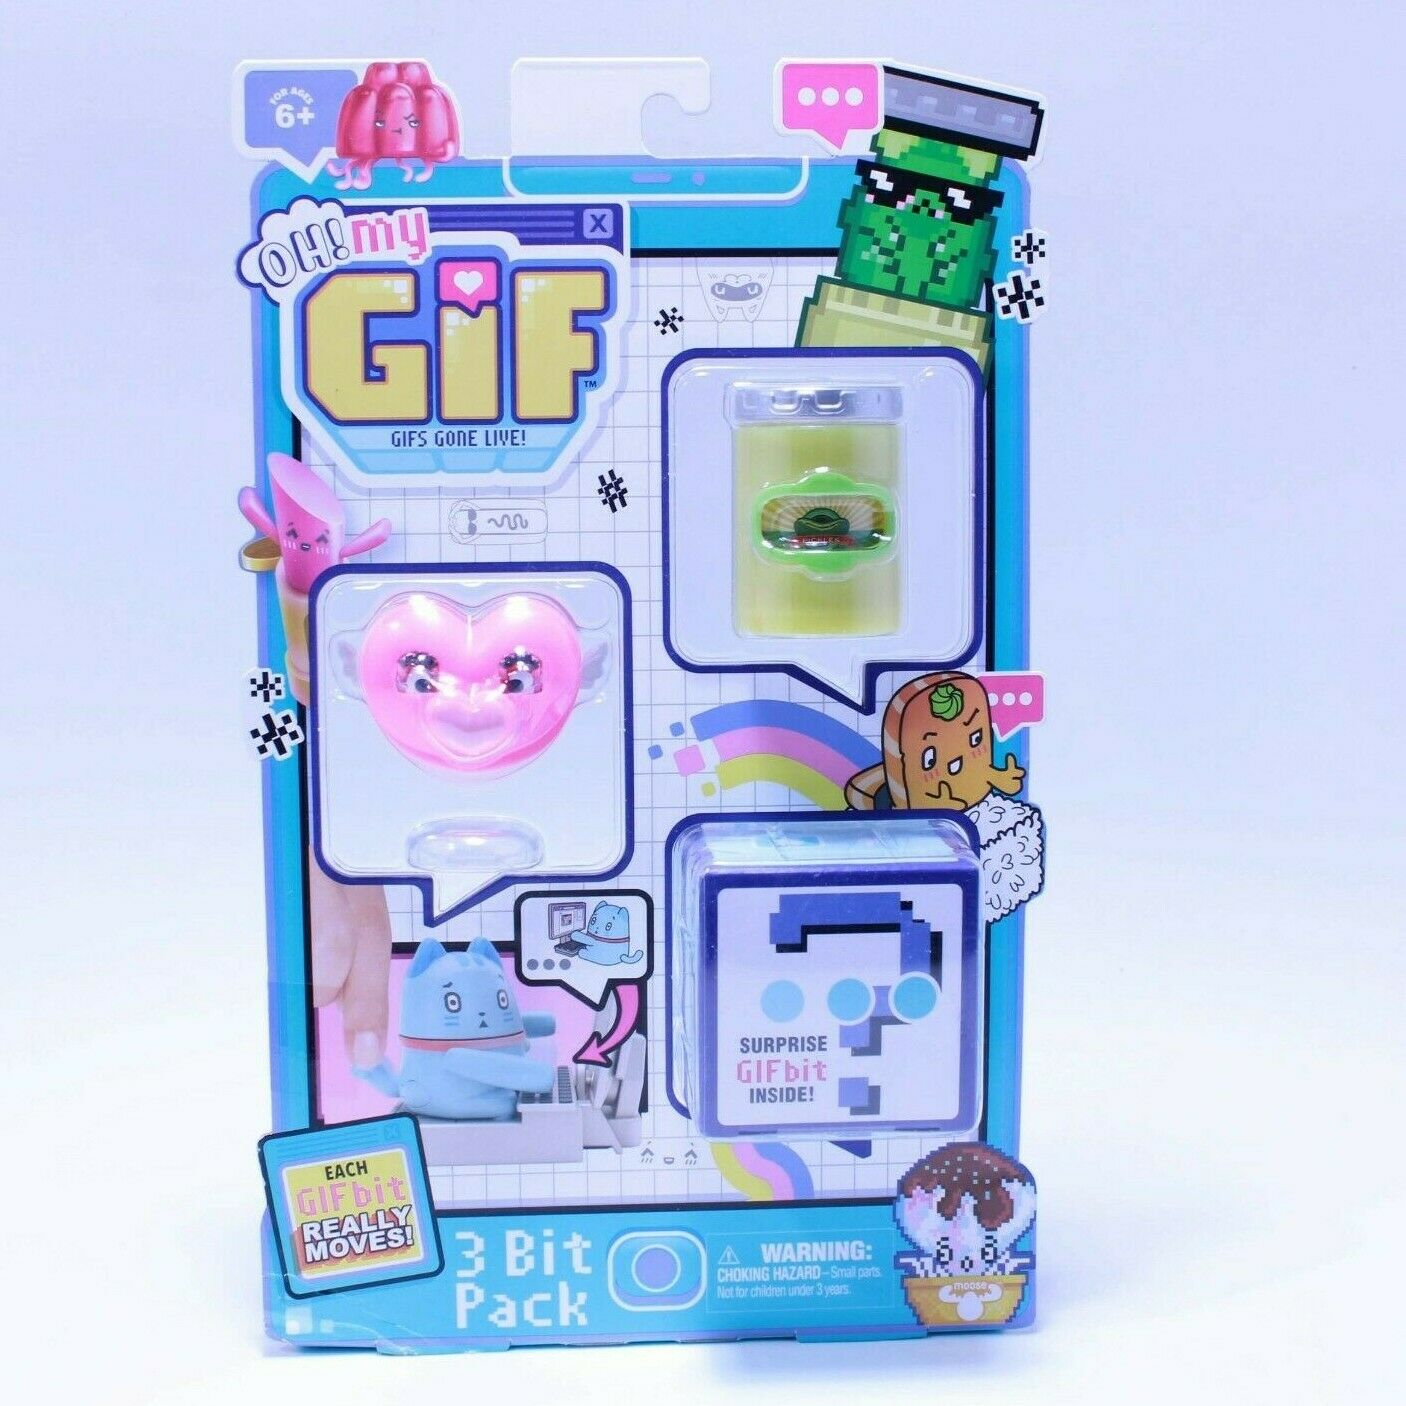 Oh! My GIF - 3 Bit Pack - Heart & Pickles + Surprise Meme Toys